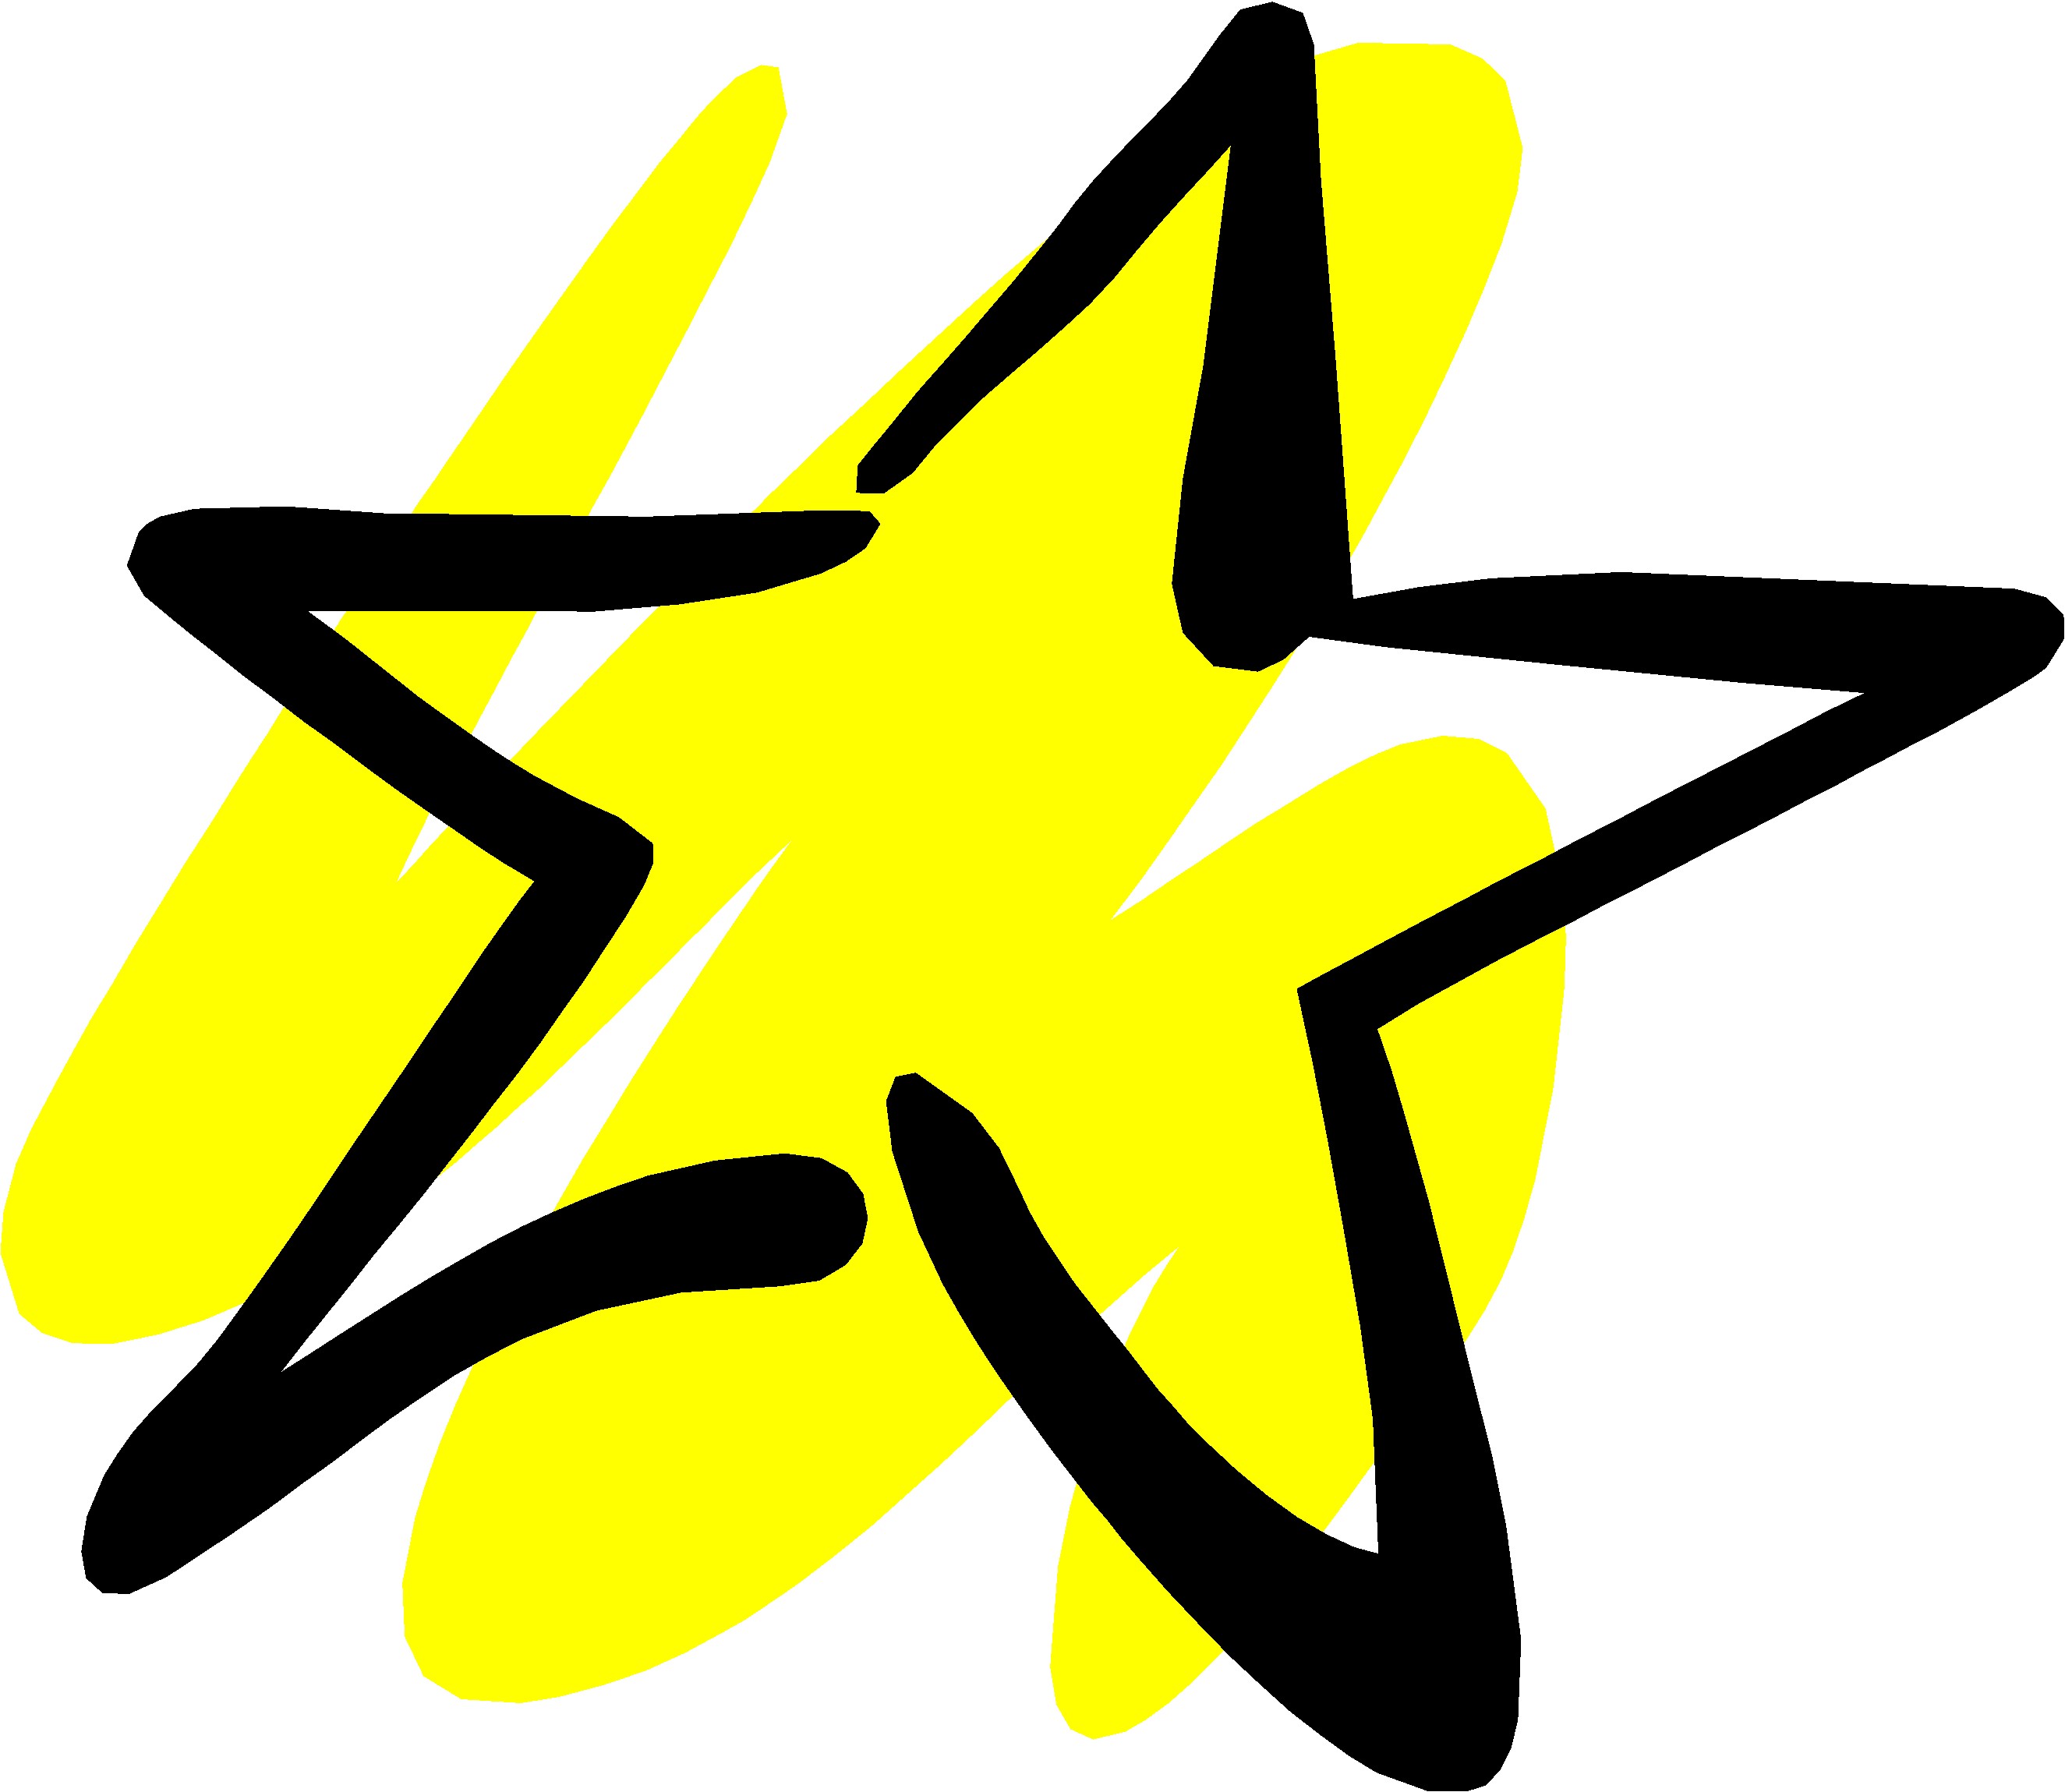 Yellow-star.jpg - ClipArt Best - ClipArt Best - Cliparts.co